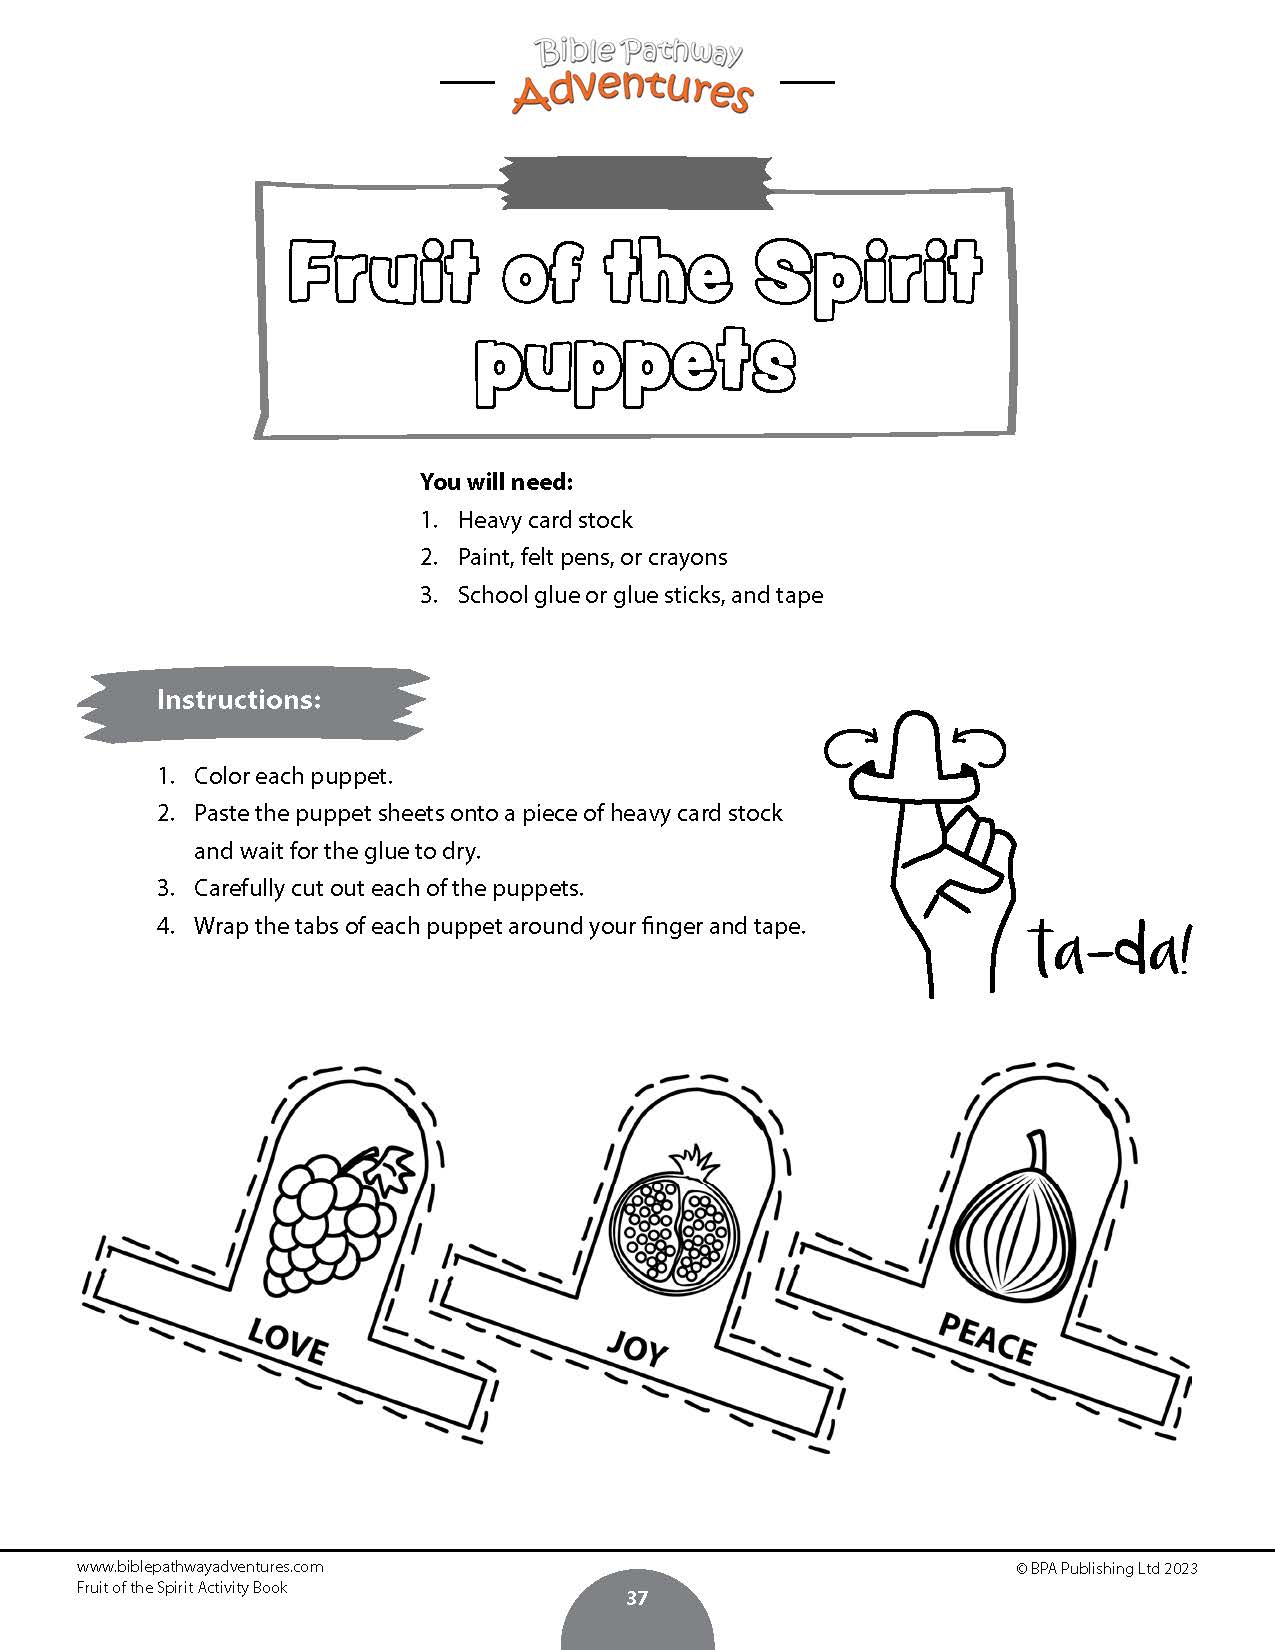 Fruit of the Spirit Activity Book (paperback)